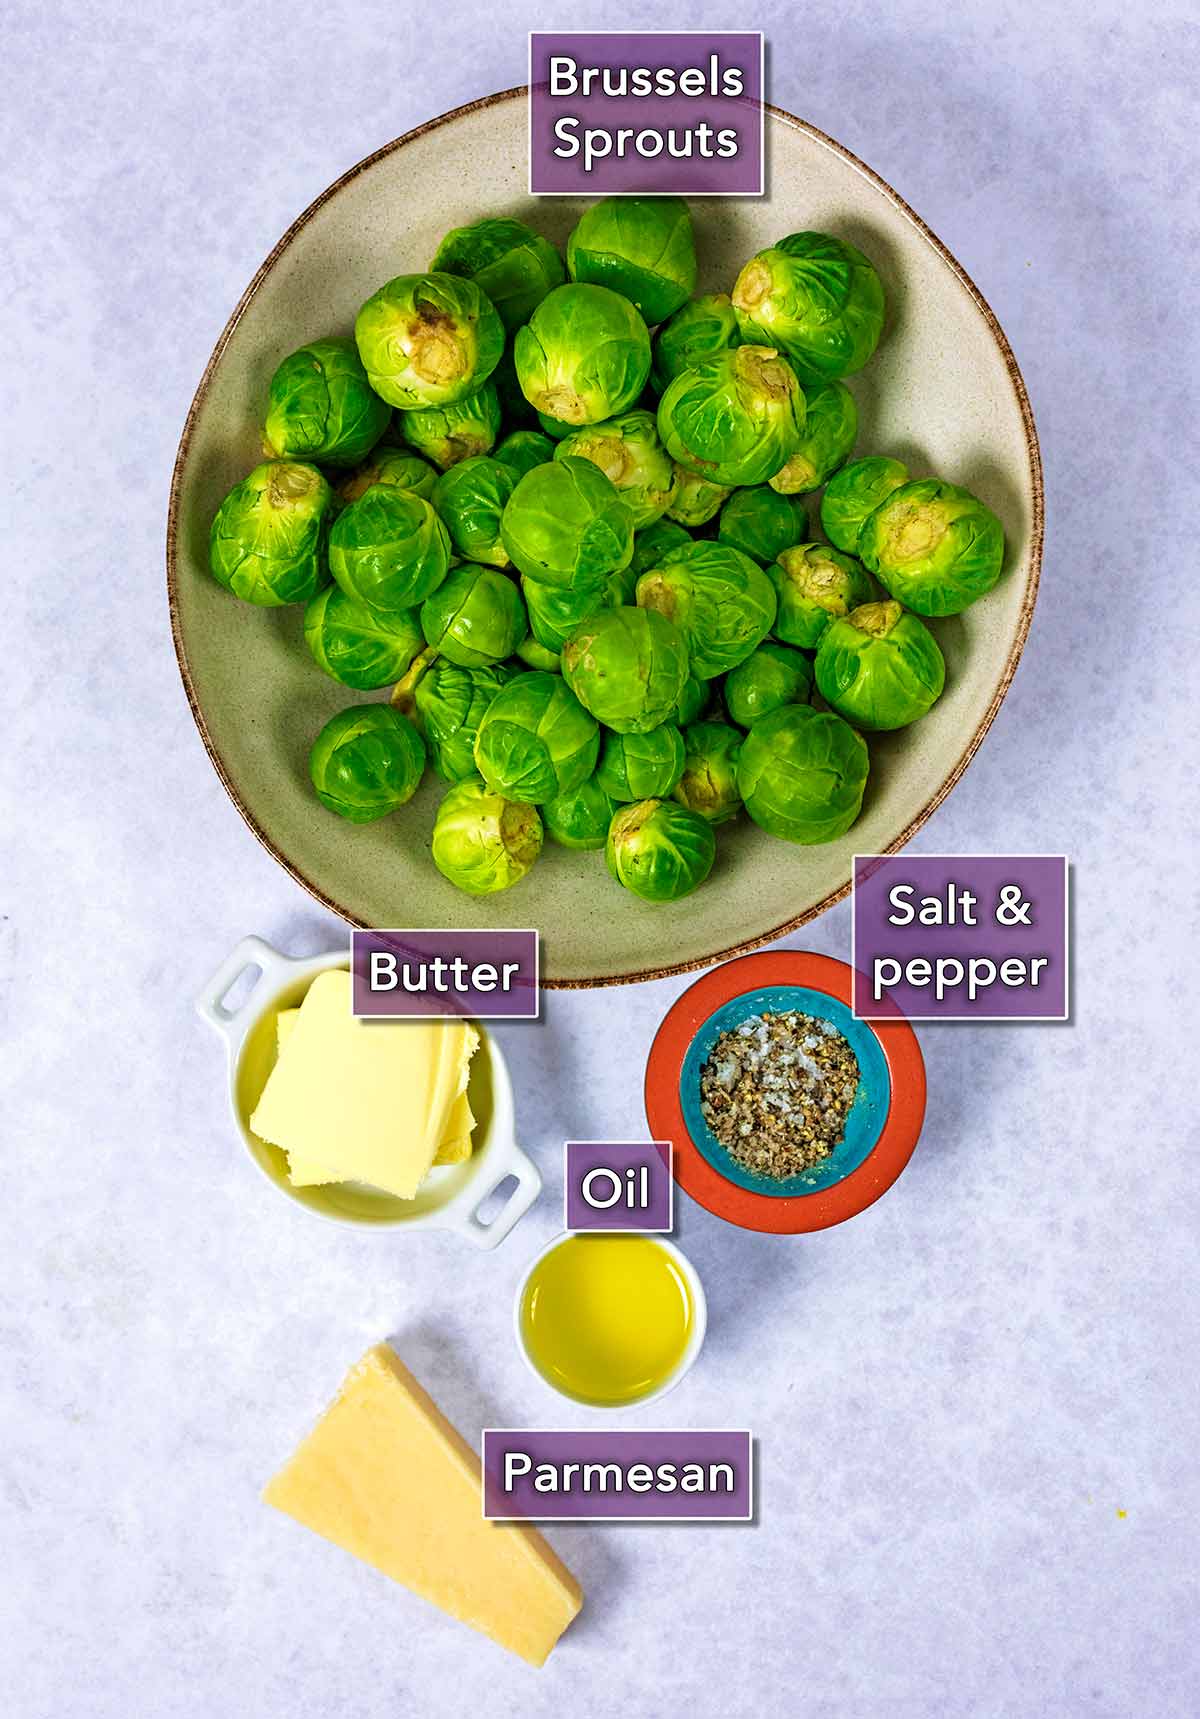 The ingredients needed for this recipe with text overlay labels.